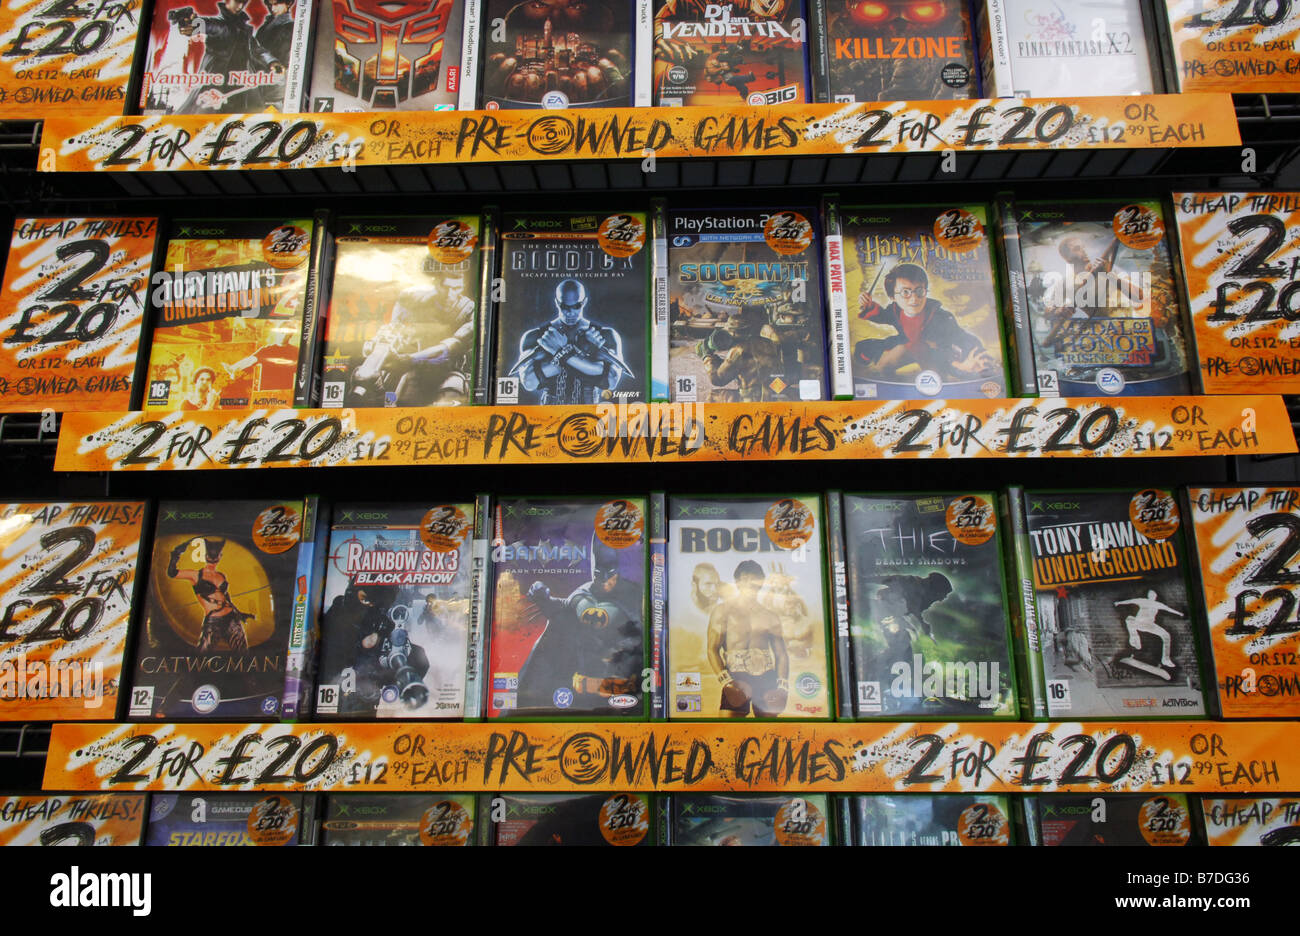 Pre-owned computer games for sale, two for twenty pounds in Game Station. Stock Photo